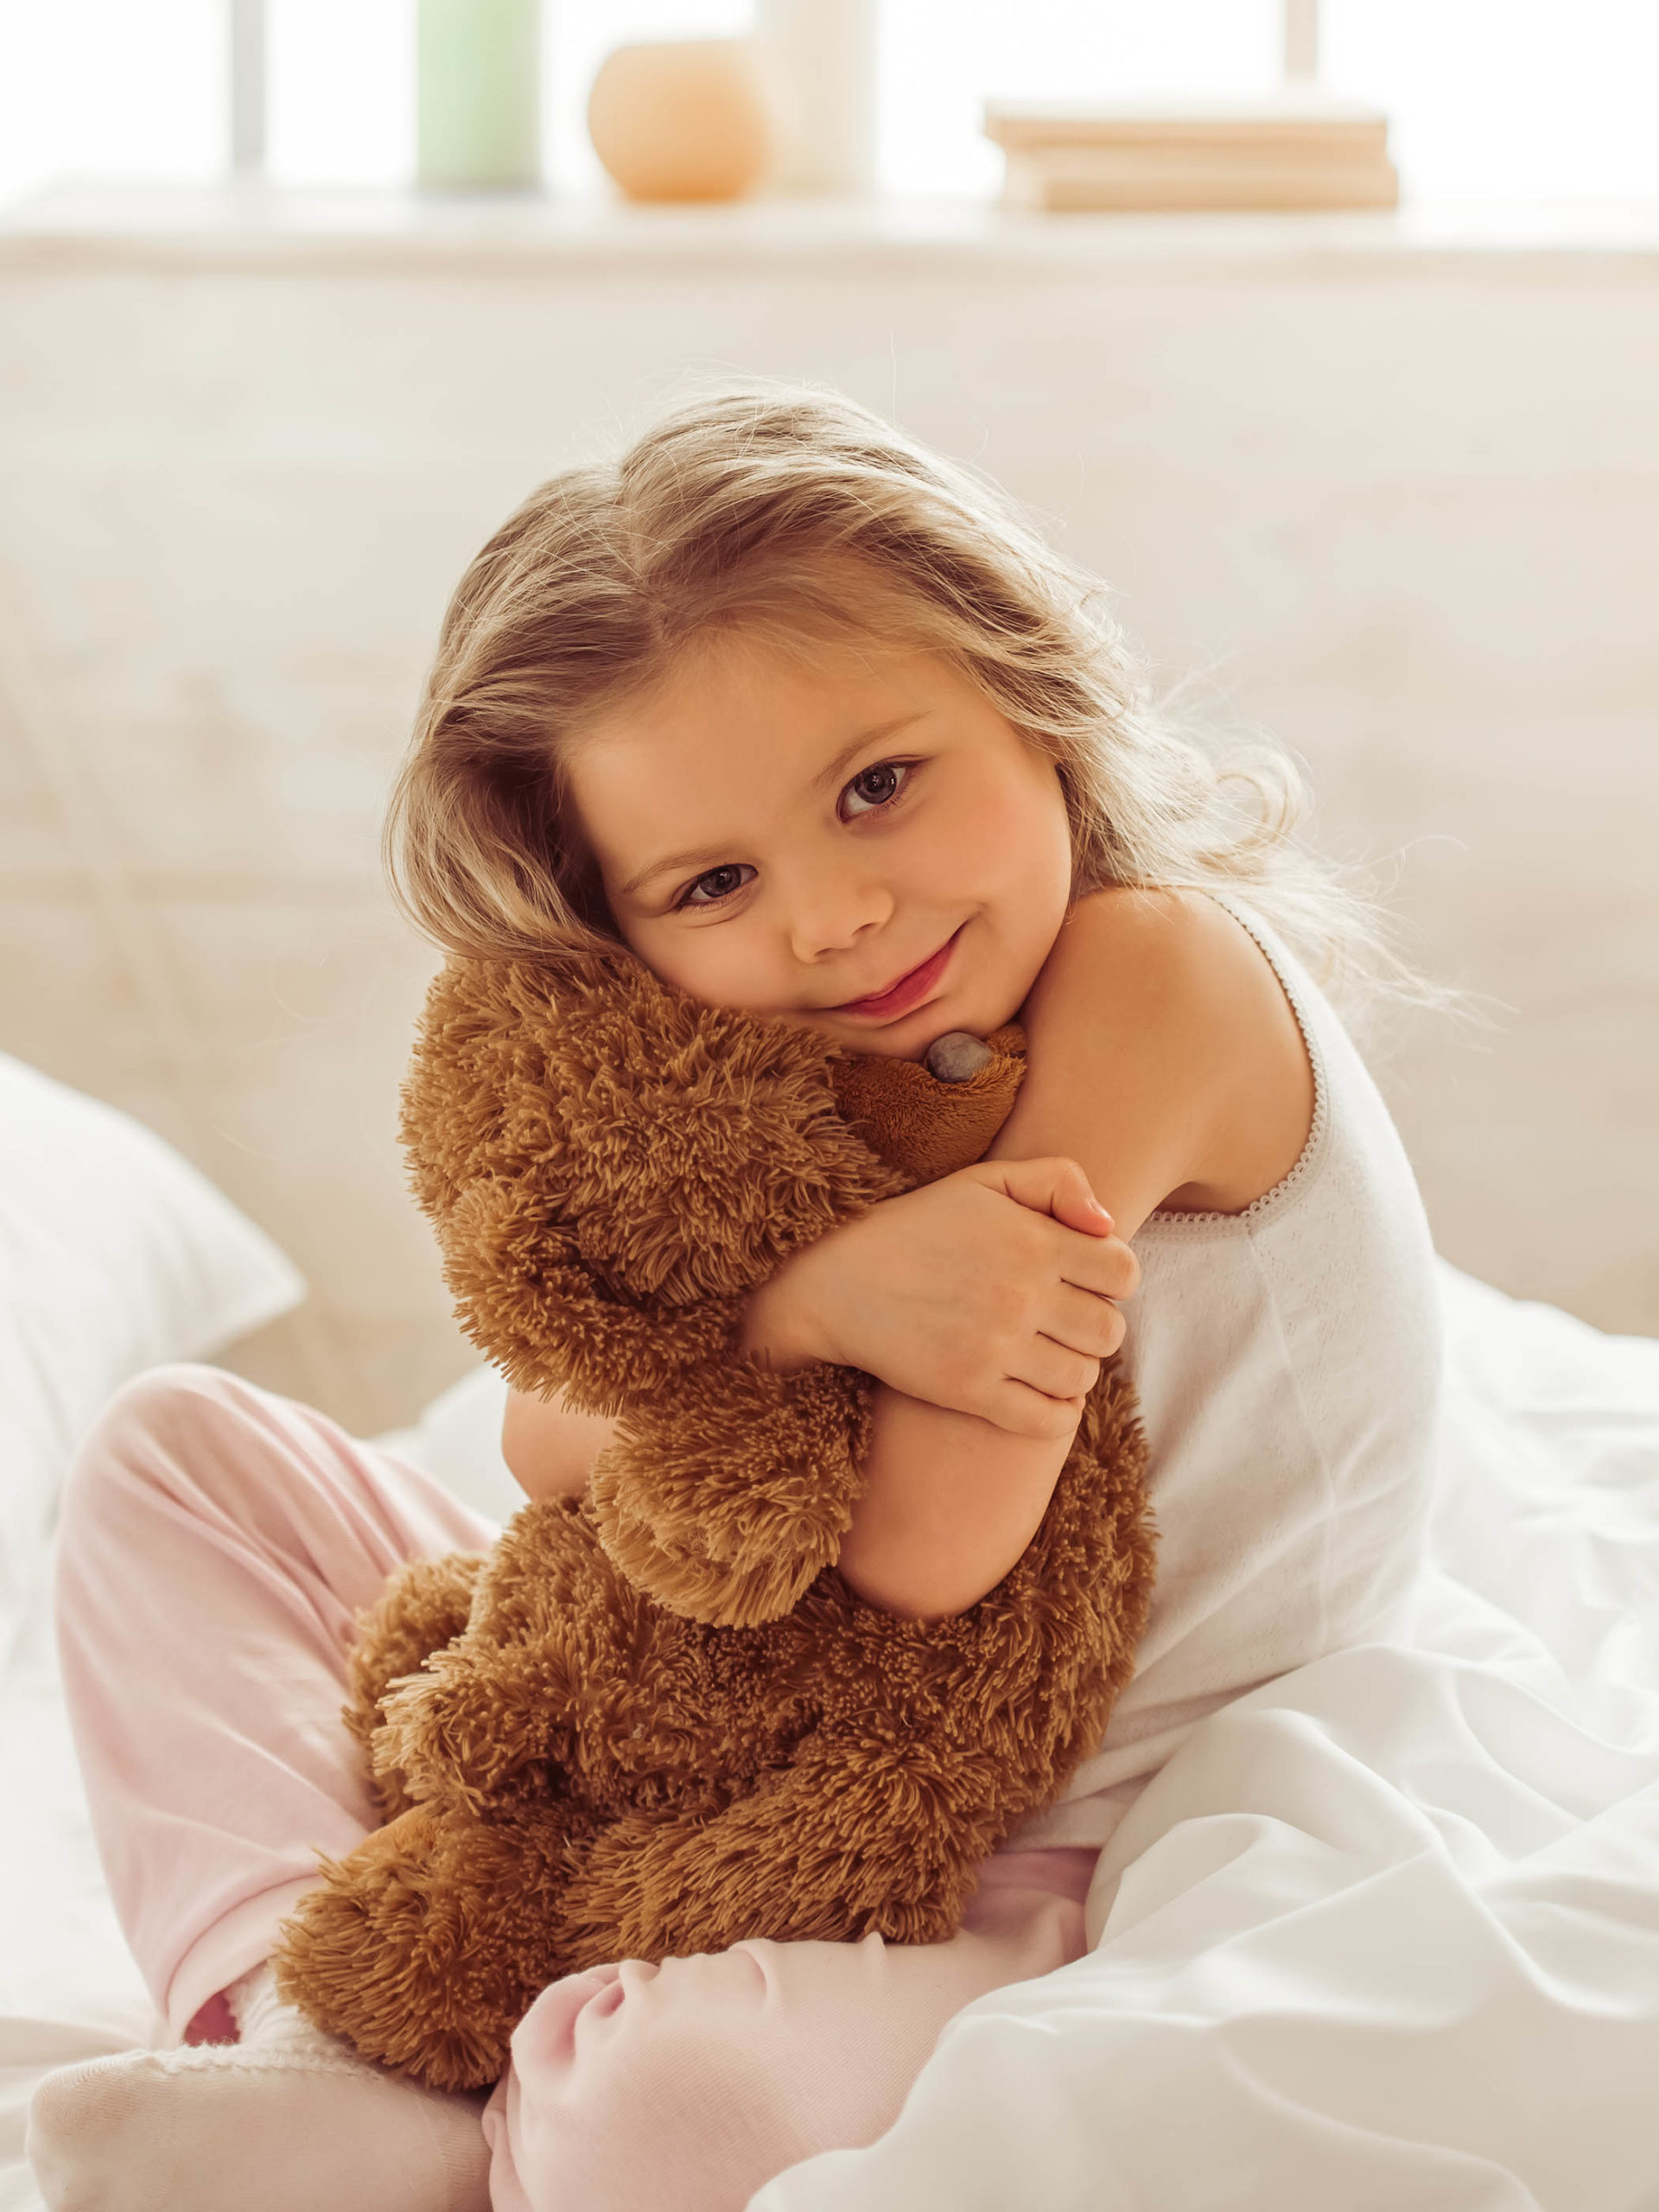 Sweet little girl is hugging a teddy bear while sitting on her bed at home